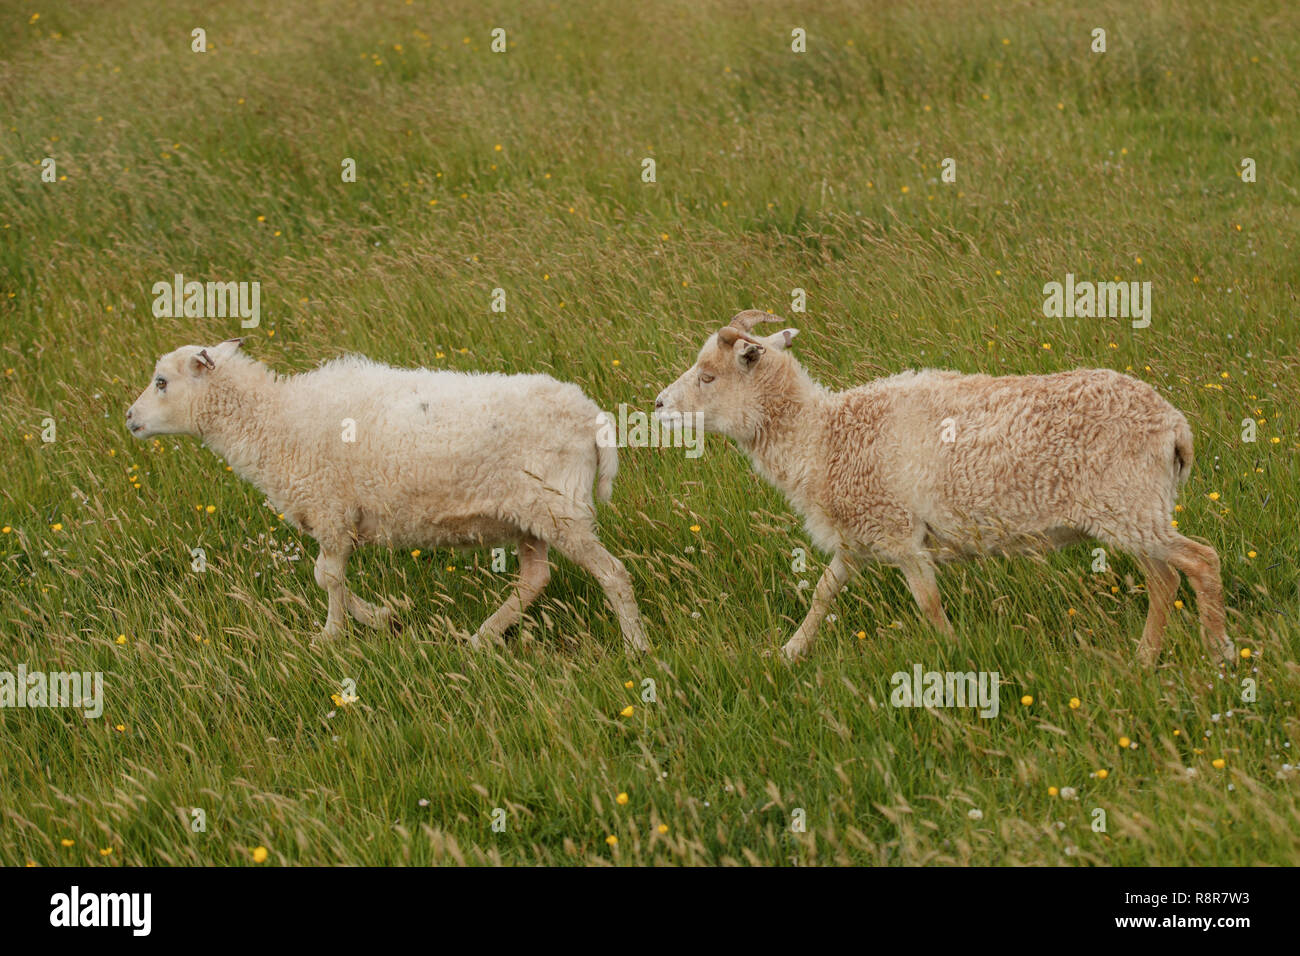 The North Ronaldsay or Orkney sheep is a breed from North Ronaldsay, the northernmost island of Orkney, off the north coast of Scotland. Stock Photo